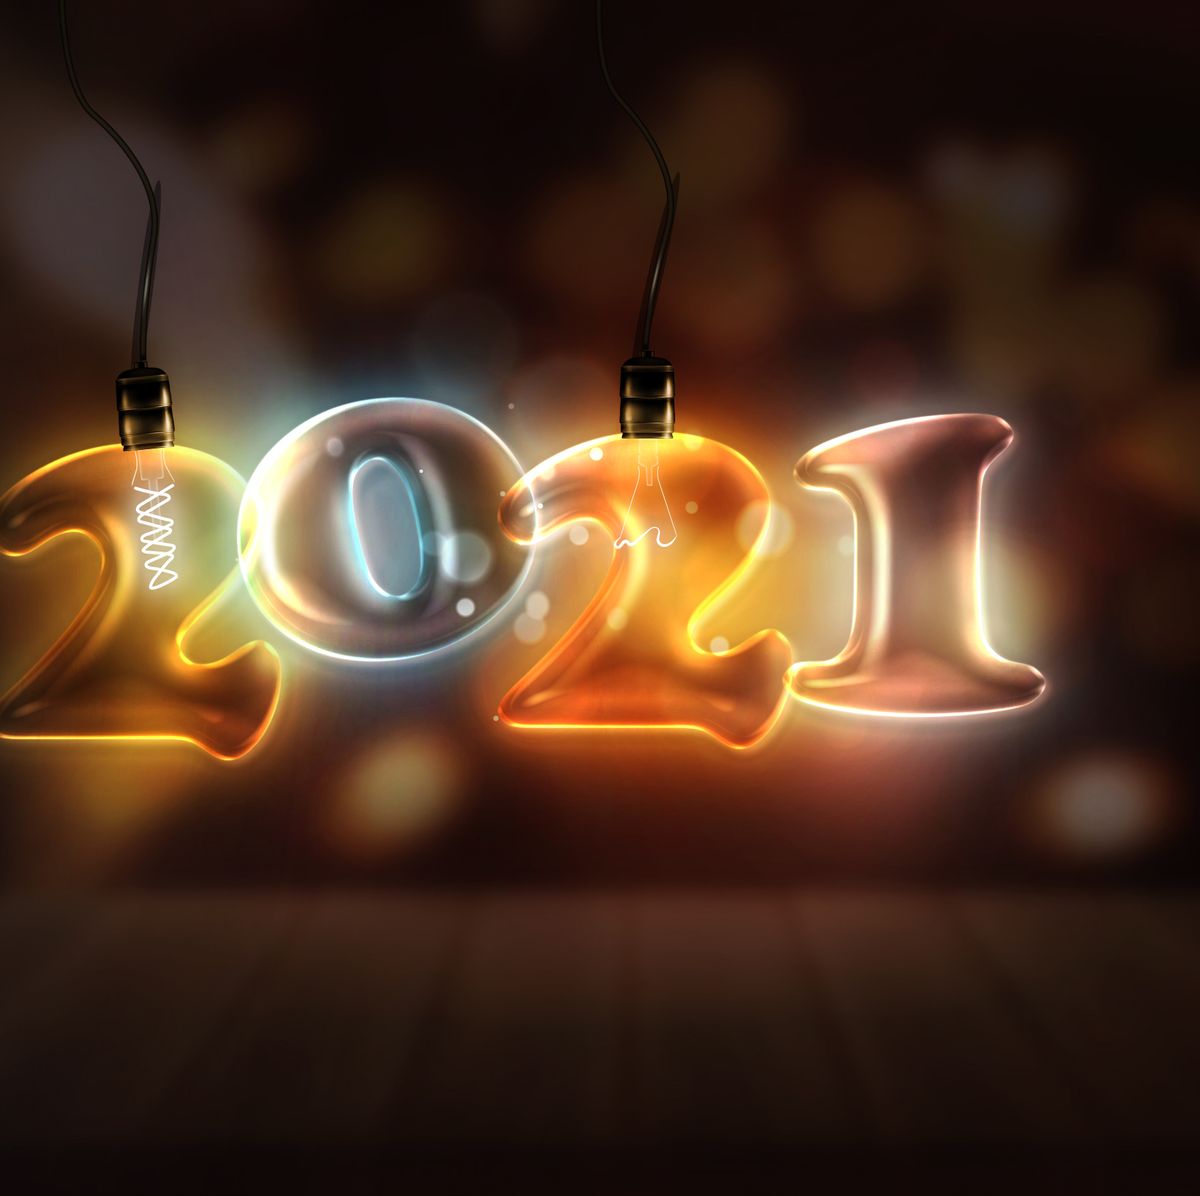 13 New Year's Eve rituals to ring in good fortune for 2023